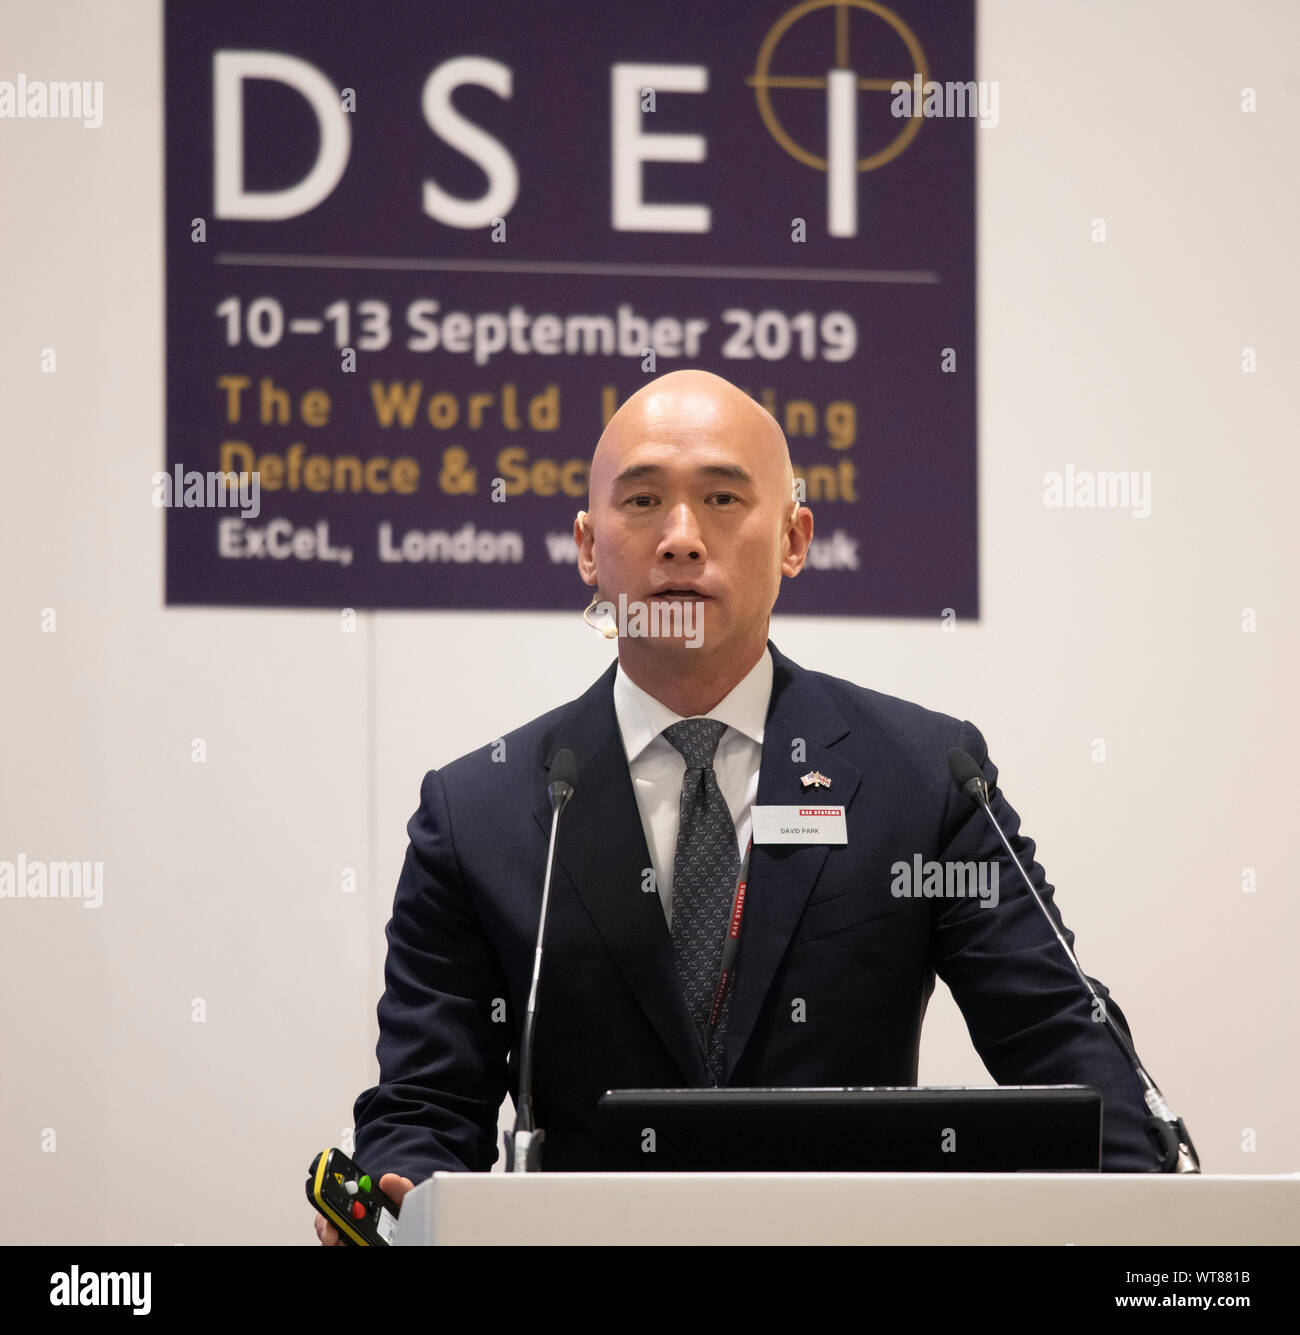 ExCel, London, UK. 11th September 2019. Defence & Security Equipment International (DSEI) event day 2 with speaker David Park, Regional Director International Business Development, BAE Systems ES. Credit: Malcolm Park/Alamy Live News. Stock Photo